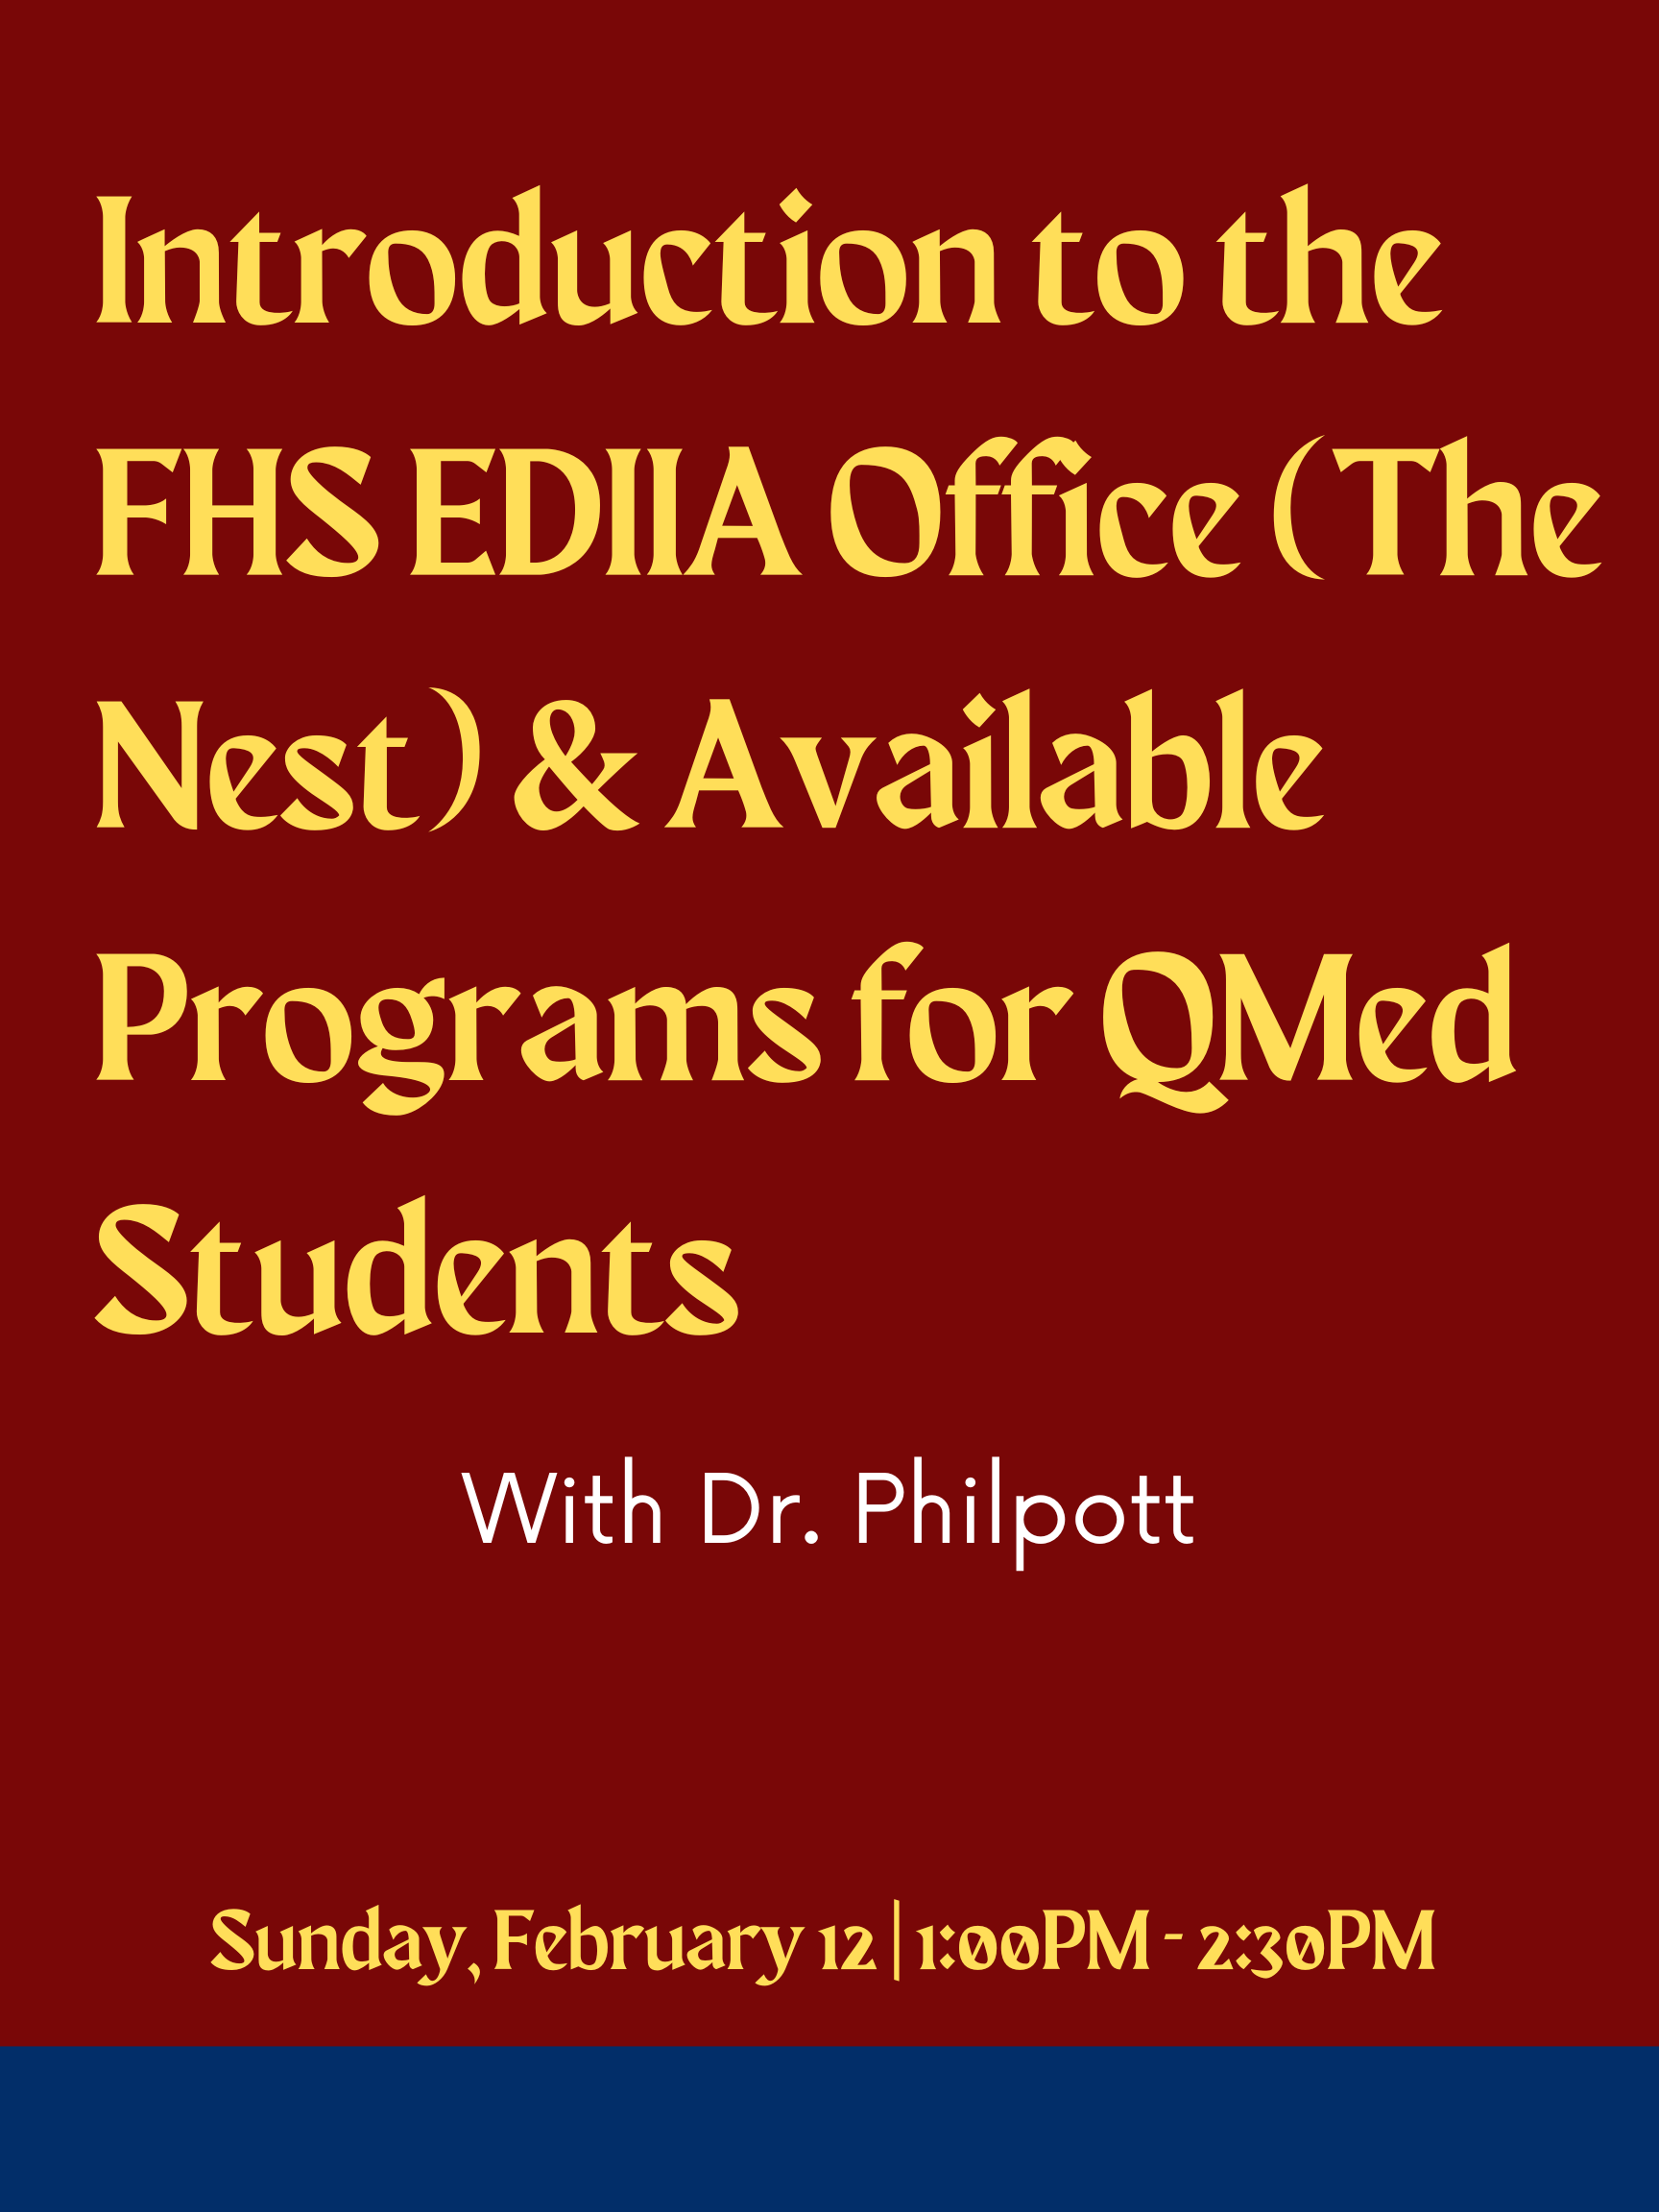 Introduction+to+the+FHS+EDI_Philpott+.png